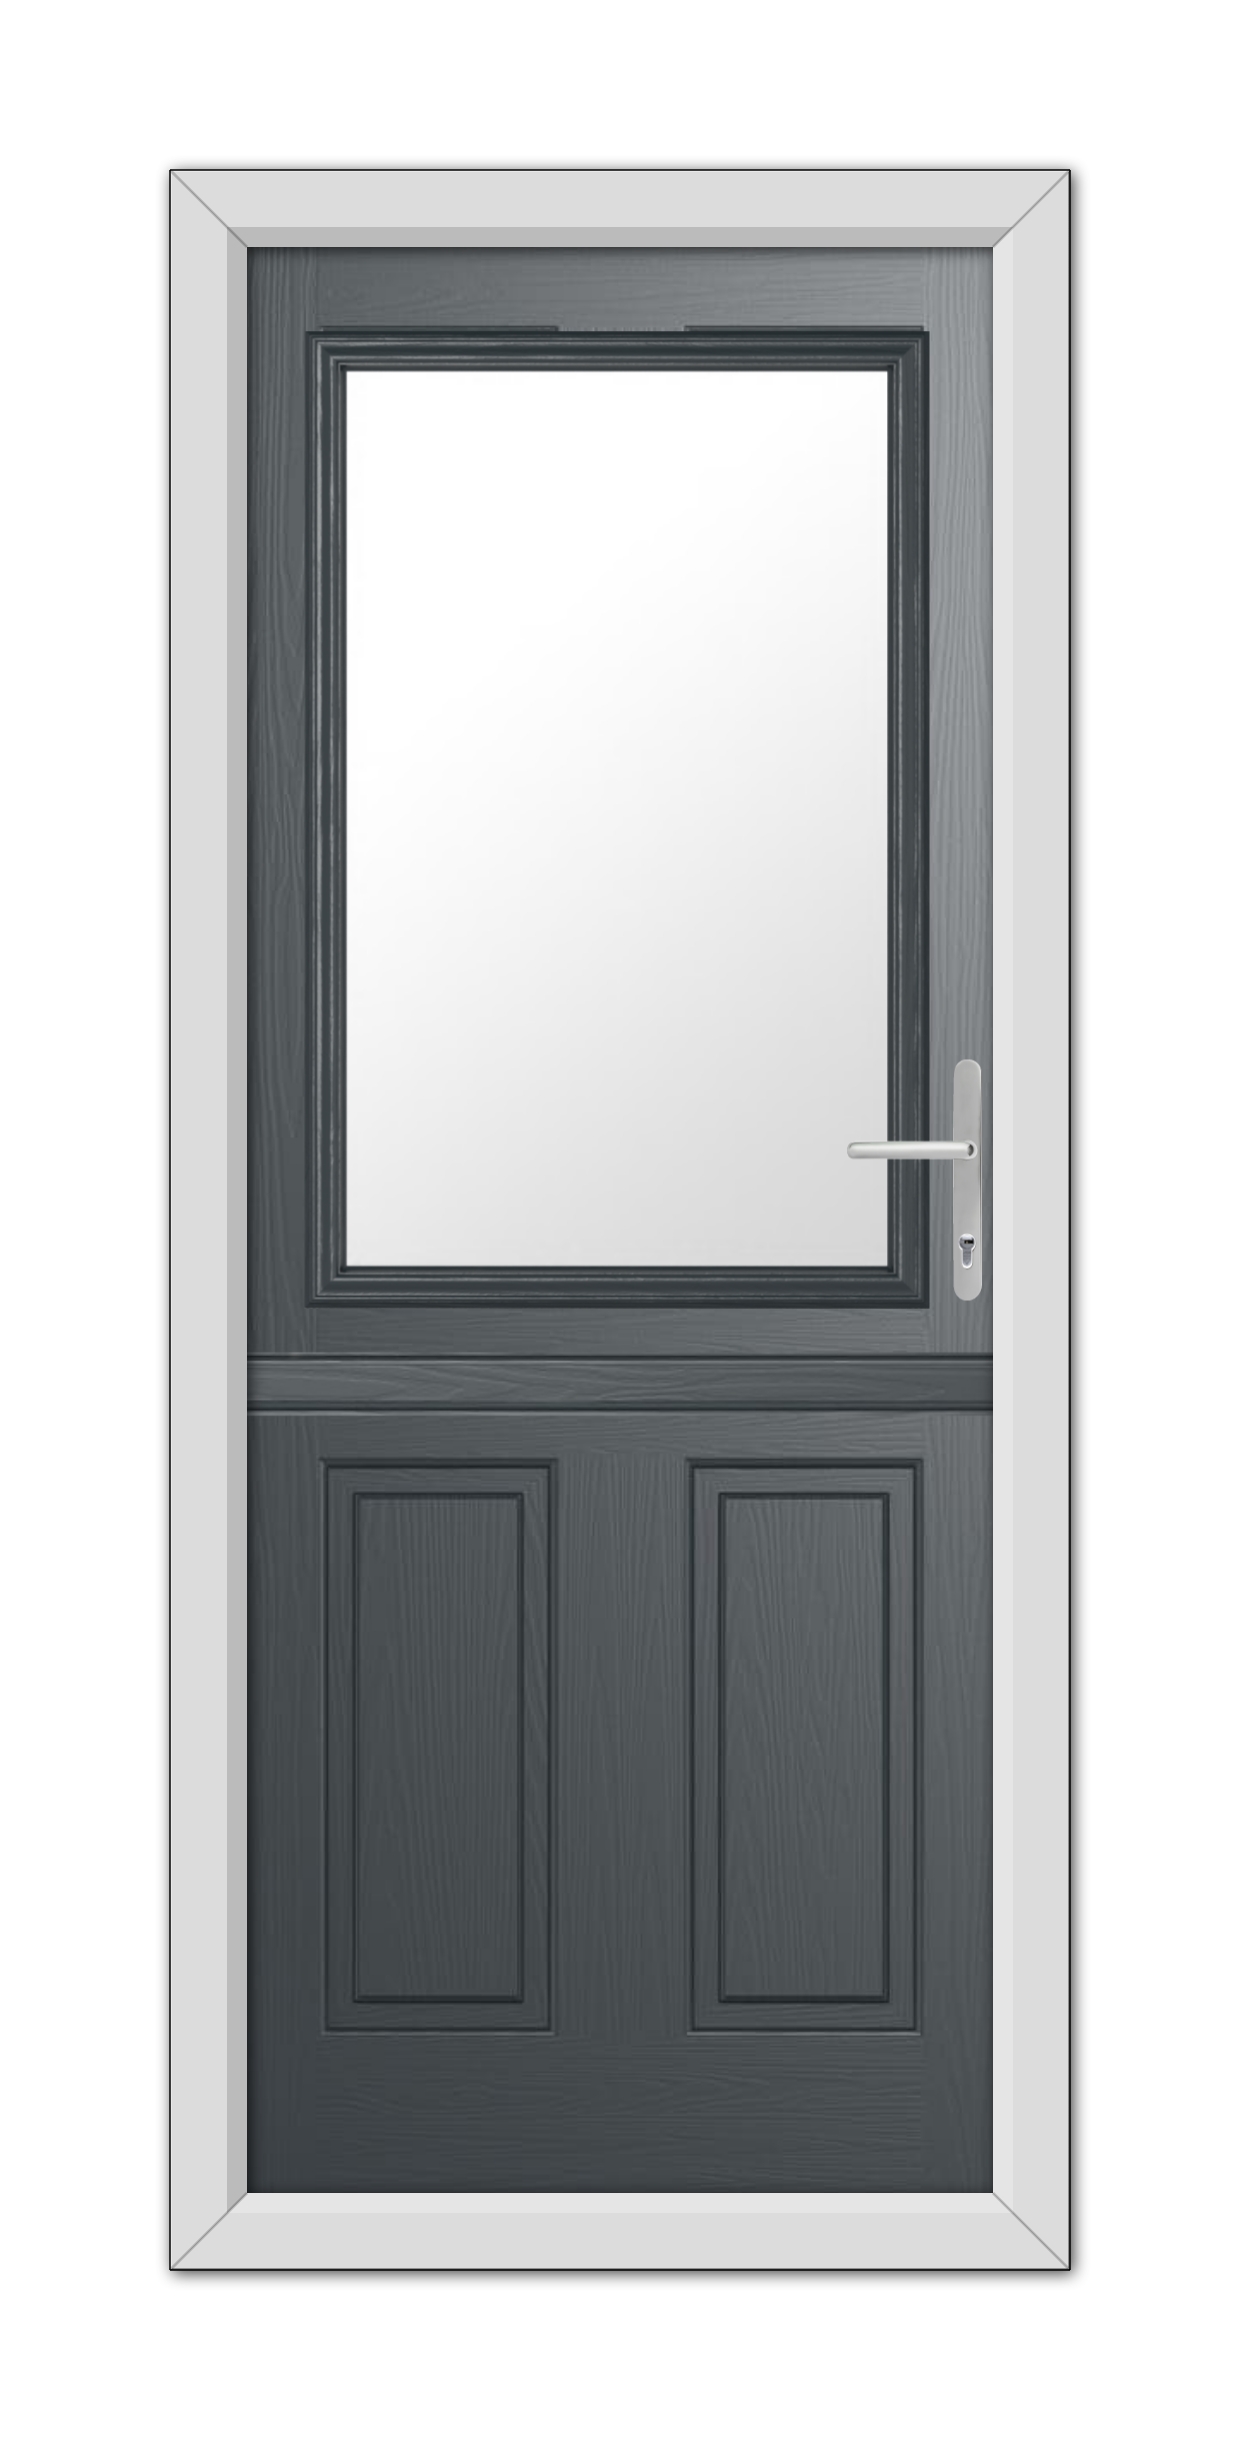 A modern Anthracite Grey Buxton Stable Composite Door with a square window at the top, set in a white frame, featuring a silver handle on the right side.